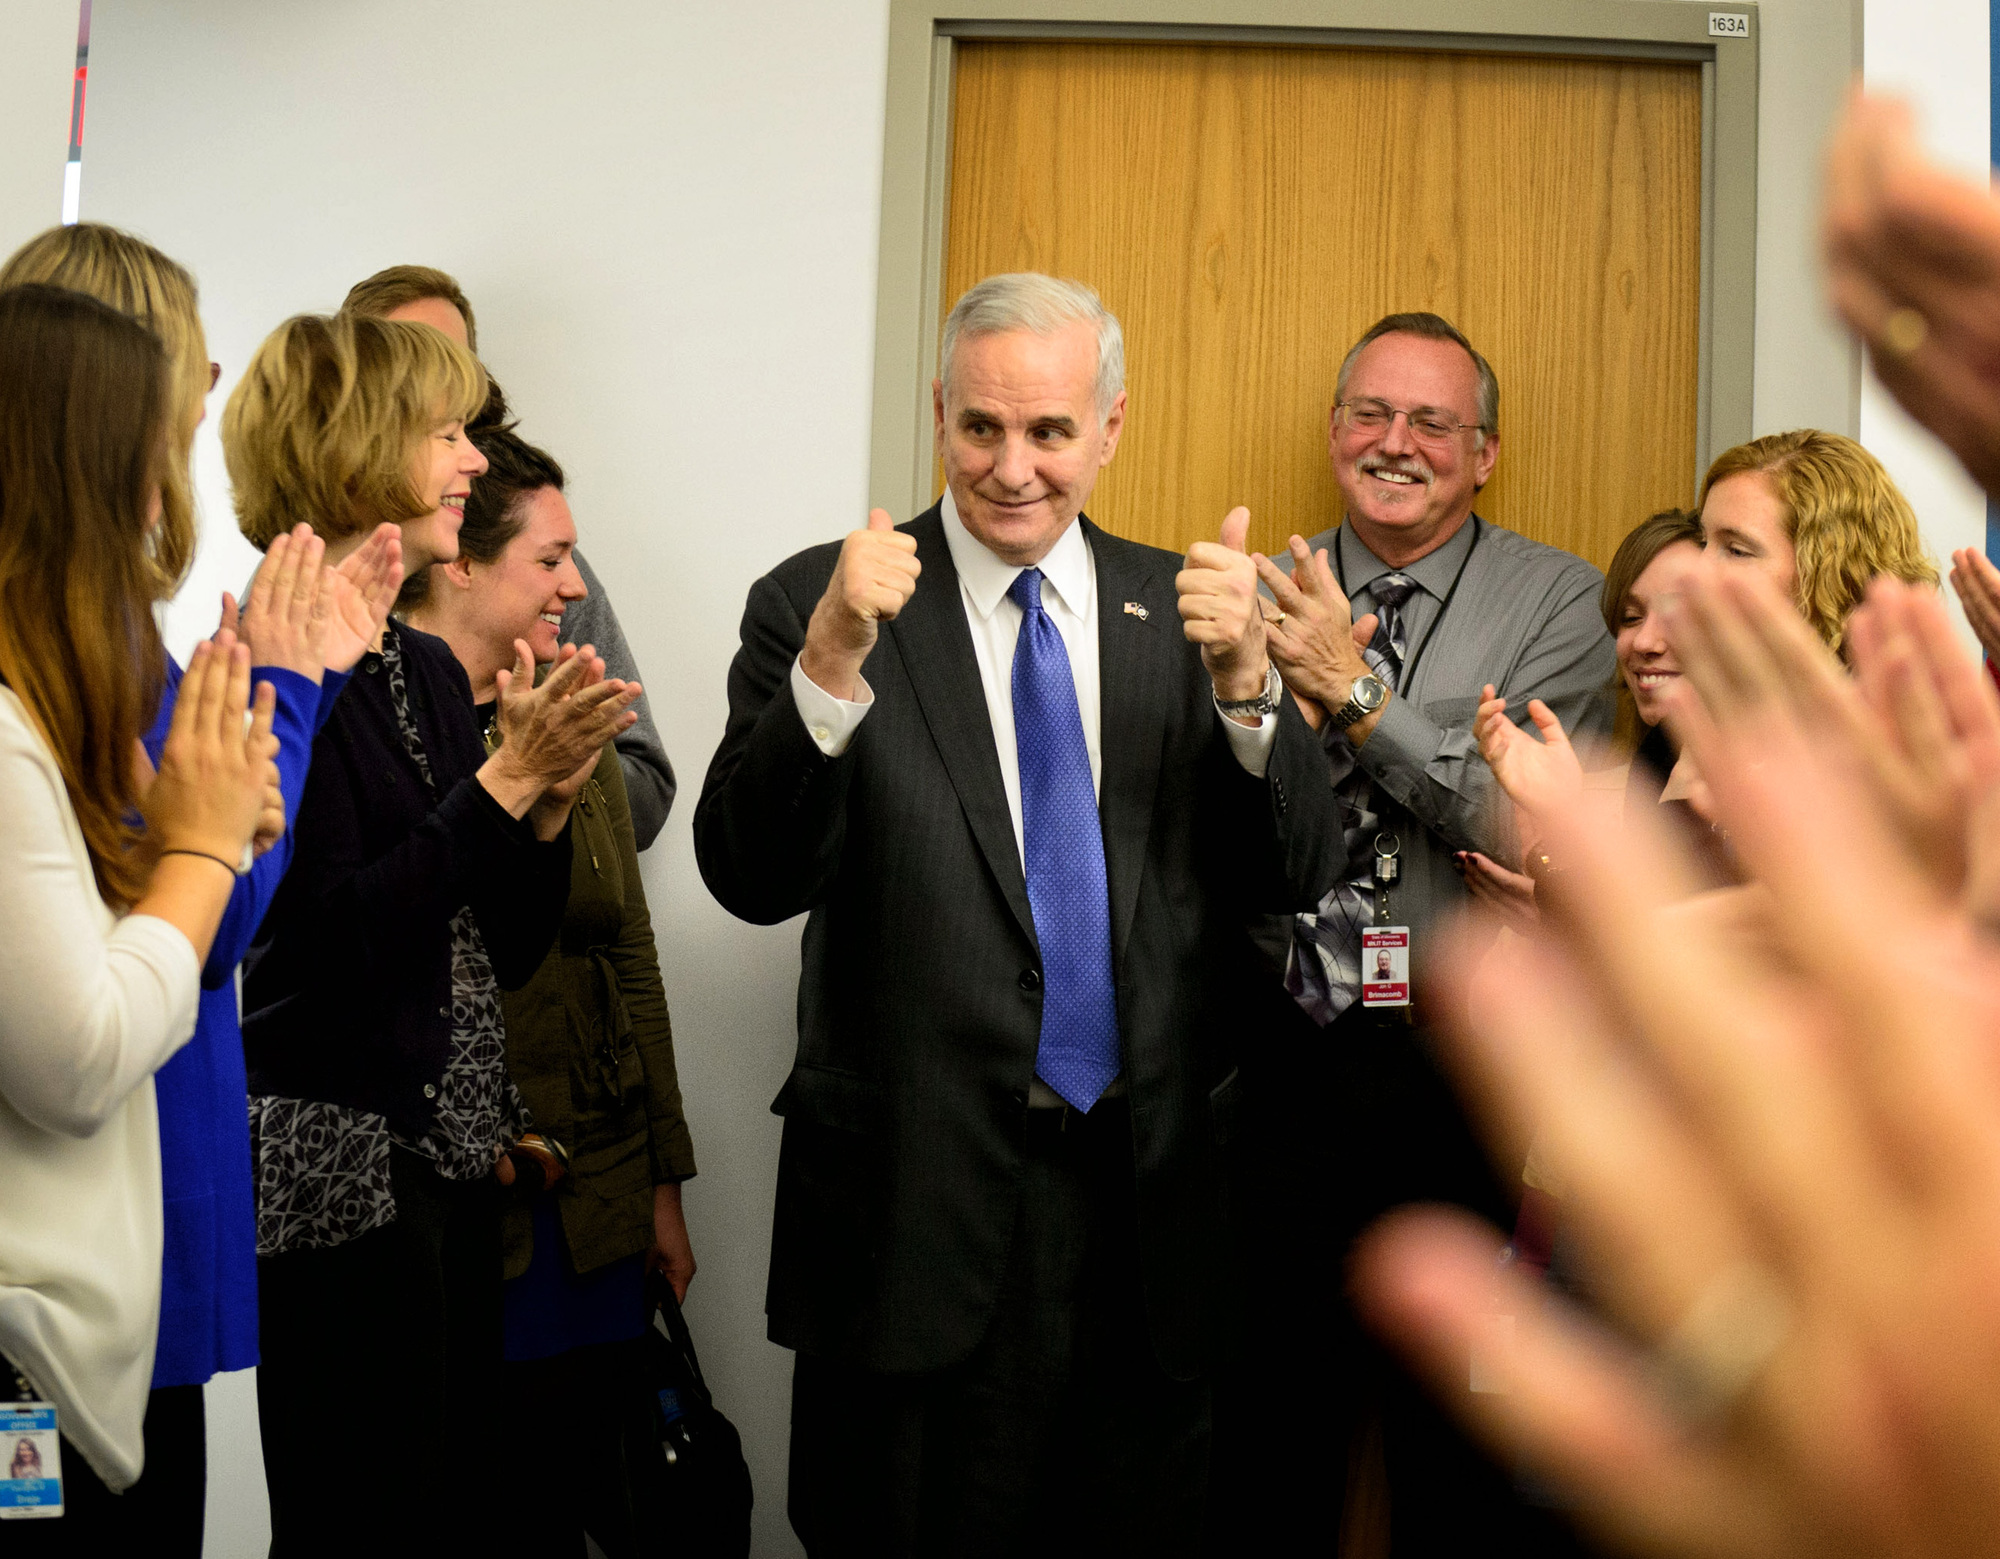 Gov. Dayton has clear message for Republicans